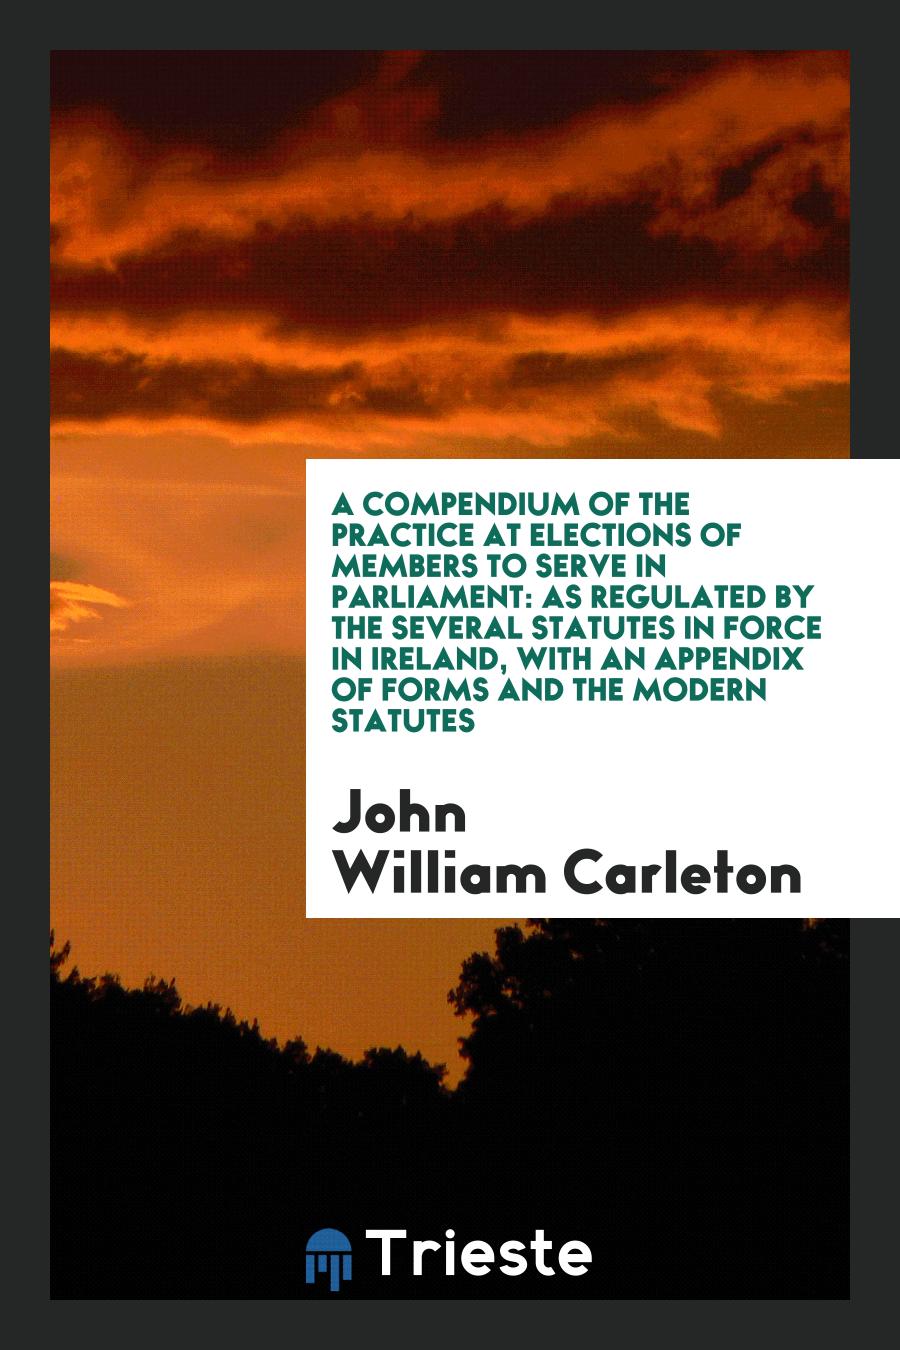 A Compendium of the Practice at Elections of Members to Serve in Parliament: As Regulated by the Several Statutes in Force in Ireland, with an Appendix of Forms and the Modern Statutes